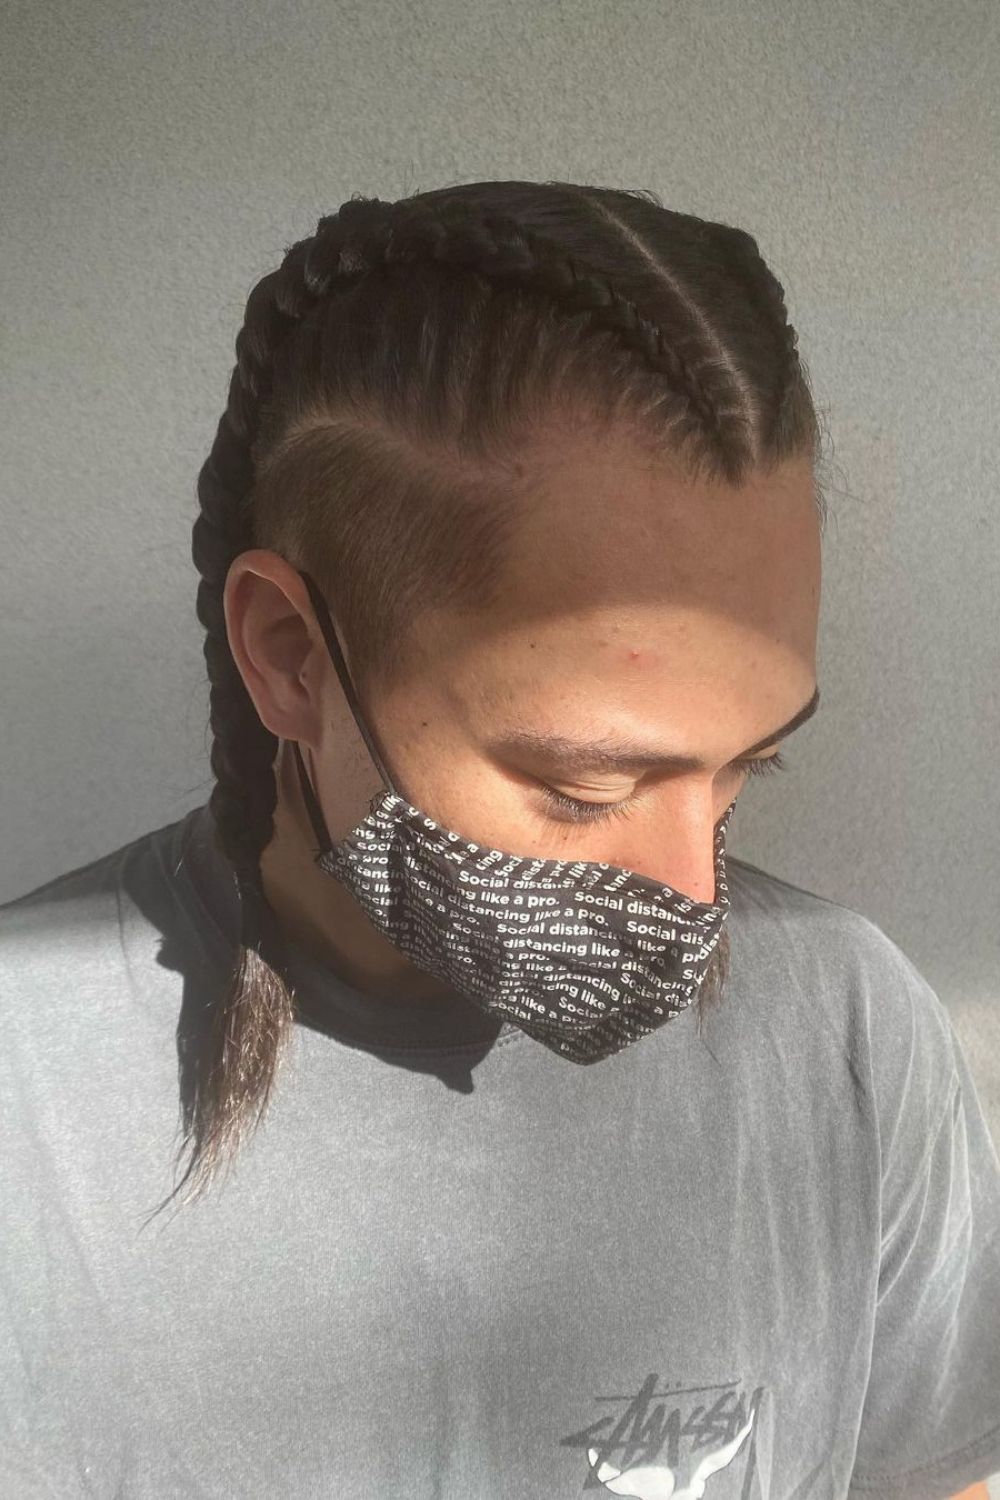 A man in faded double Dutch braids is wearing a face mask.